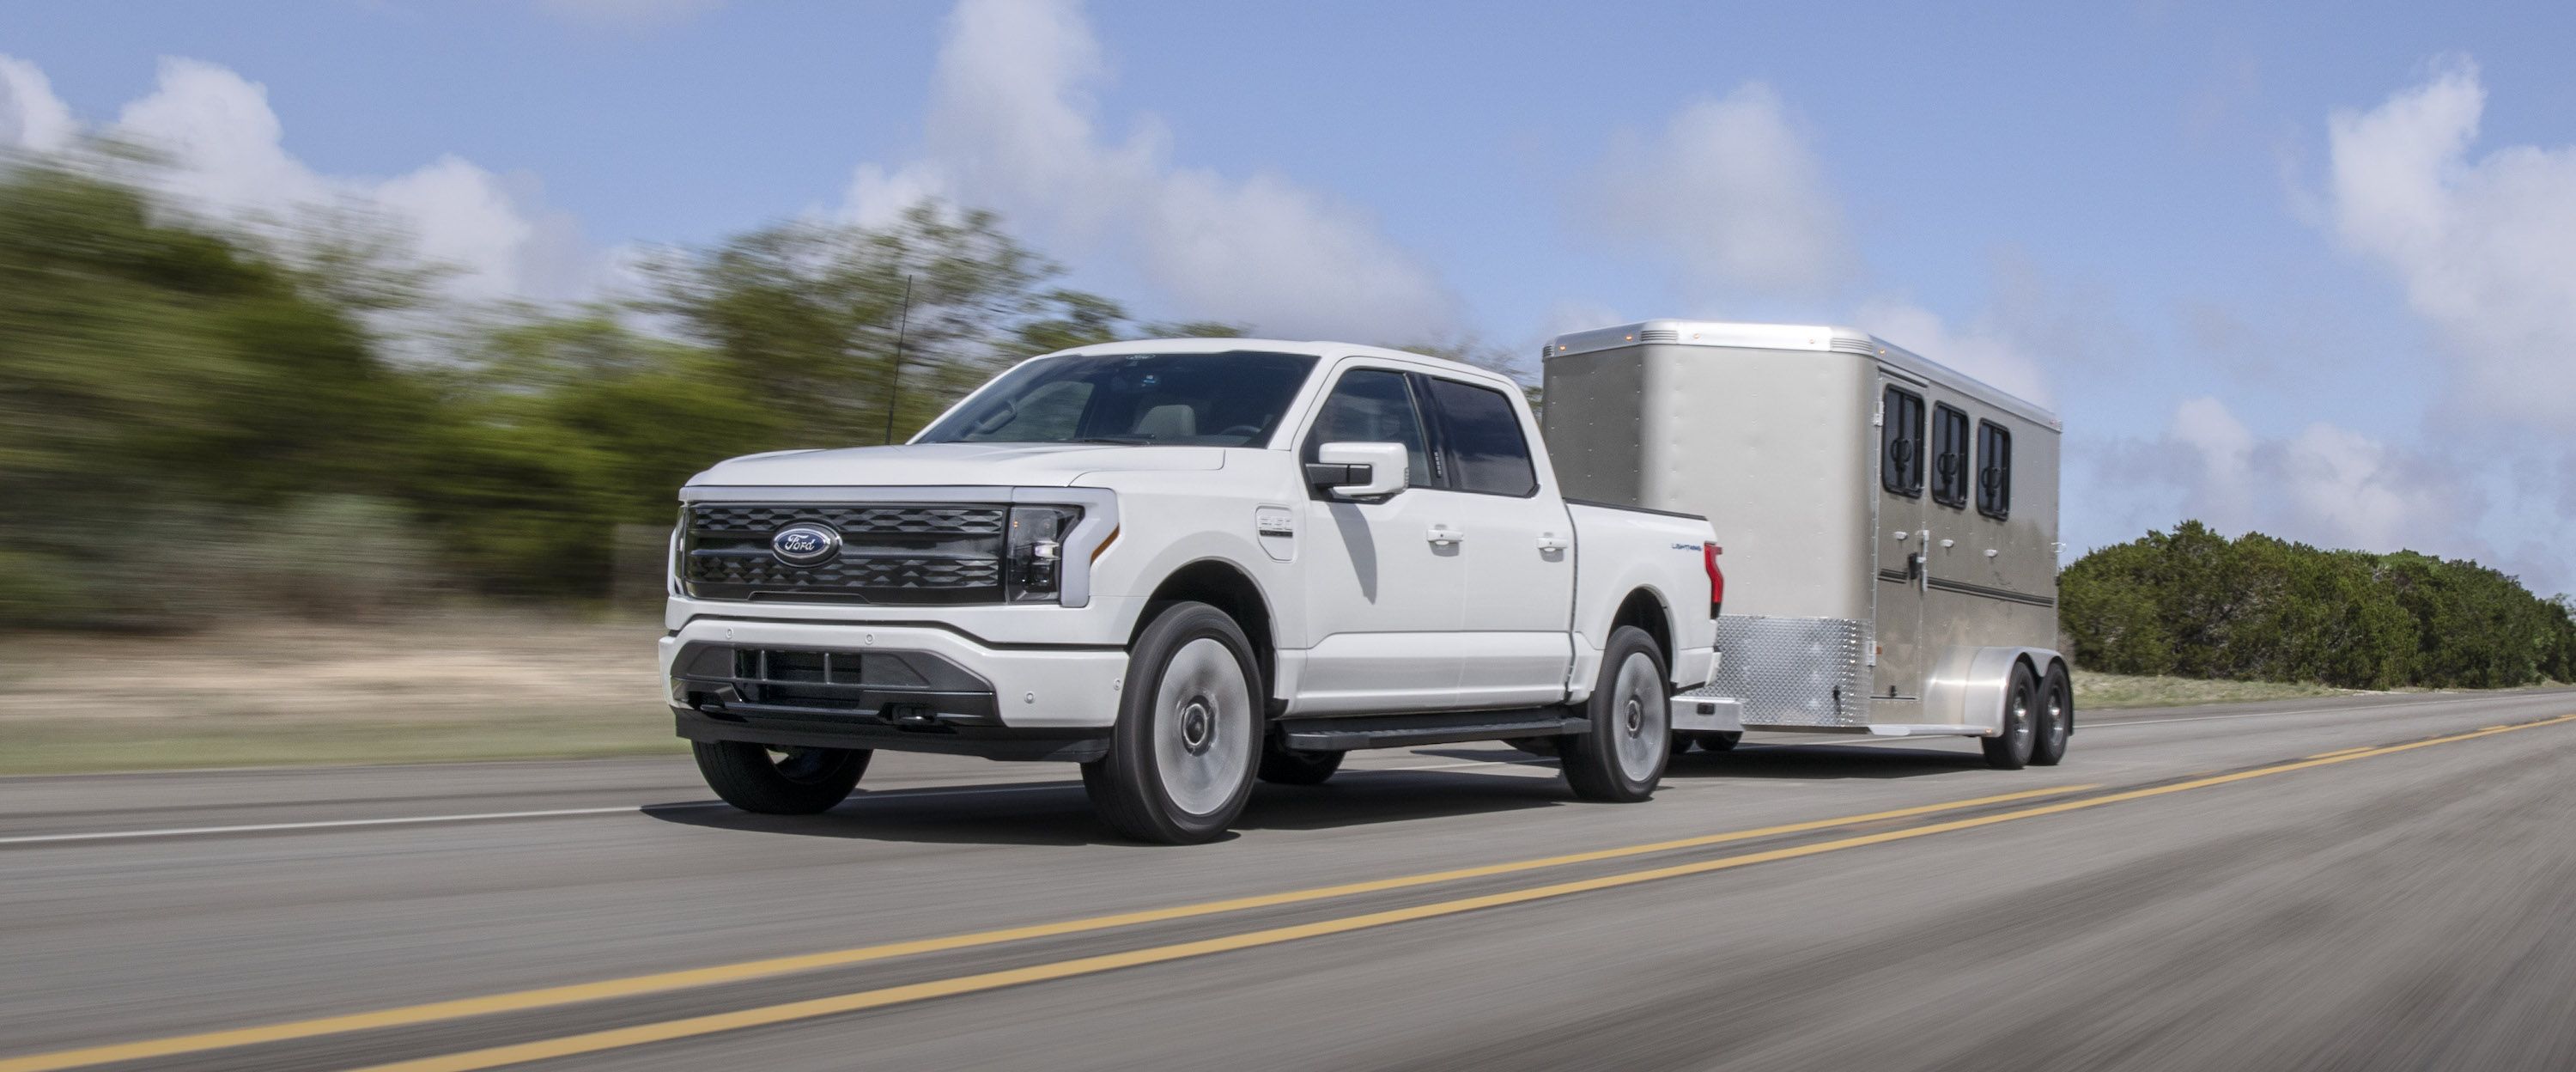 ford f150 lightning towing capacity lillianhahner